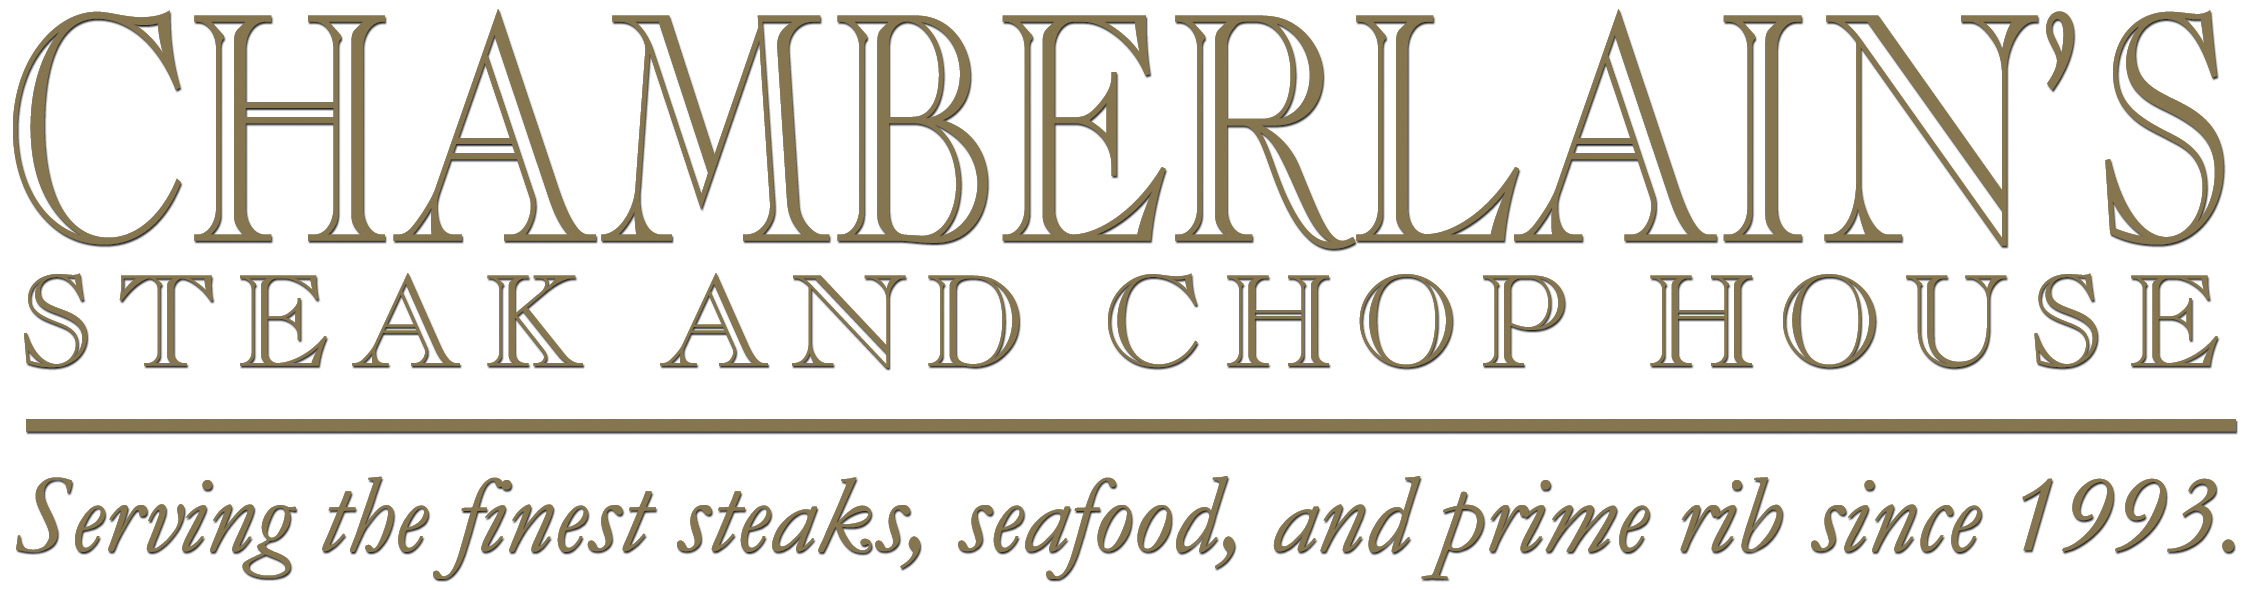 Chamberlain's Steak and Chop House. Serving the finest steaks, seafood and prime rib since  1993